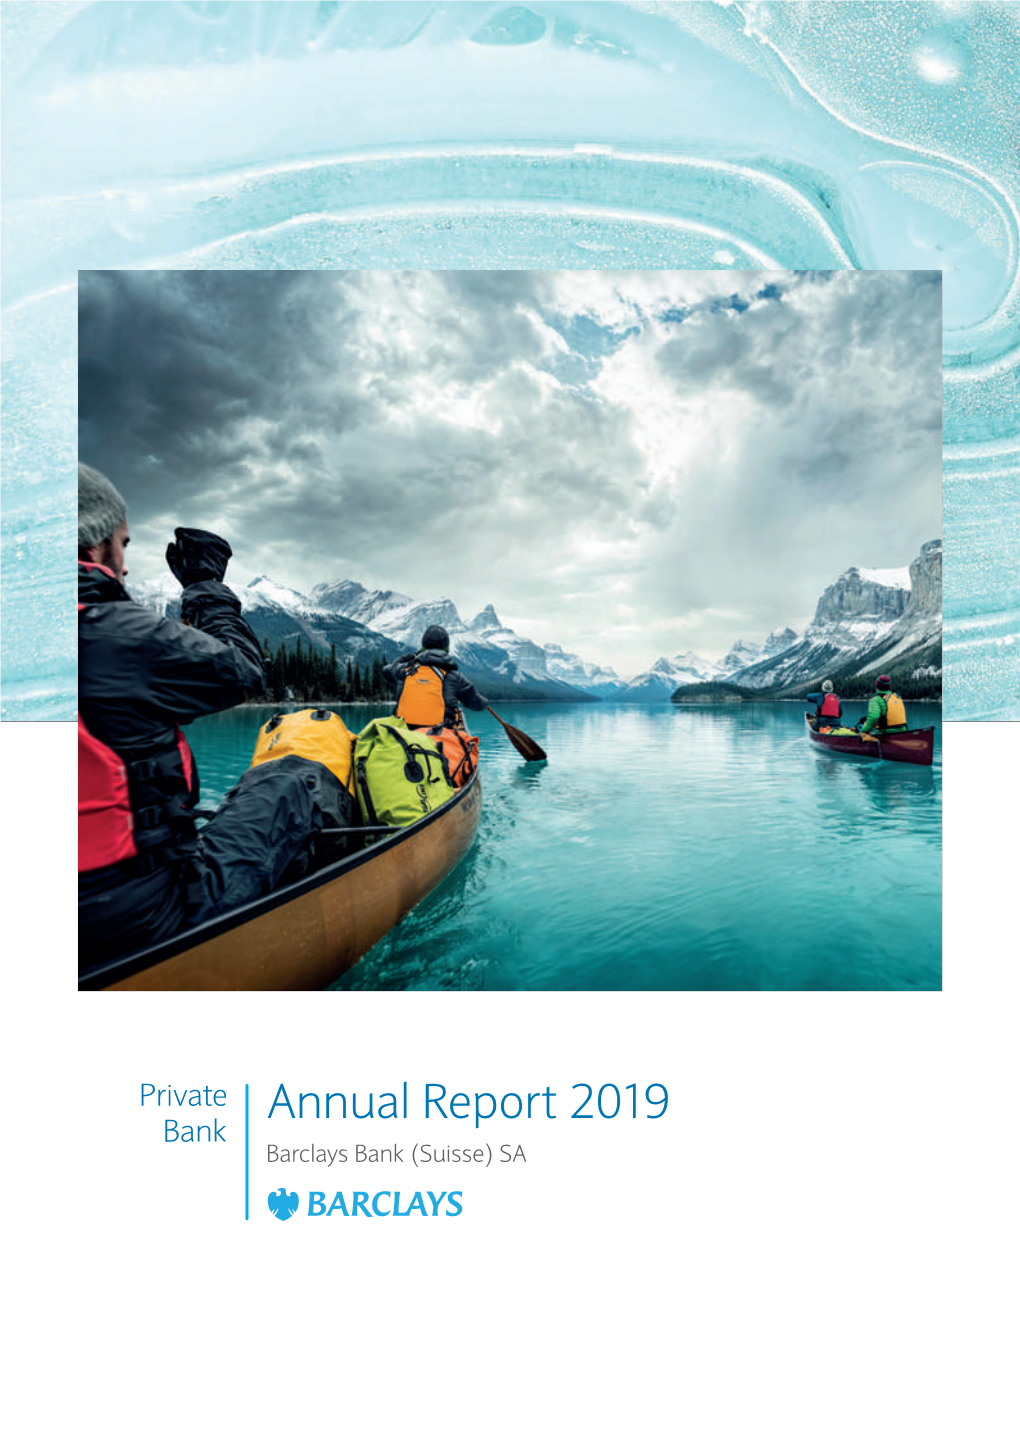 Barclays Bank (Suisse) SA Annual Report for 2019